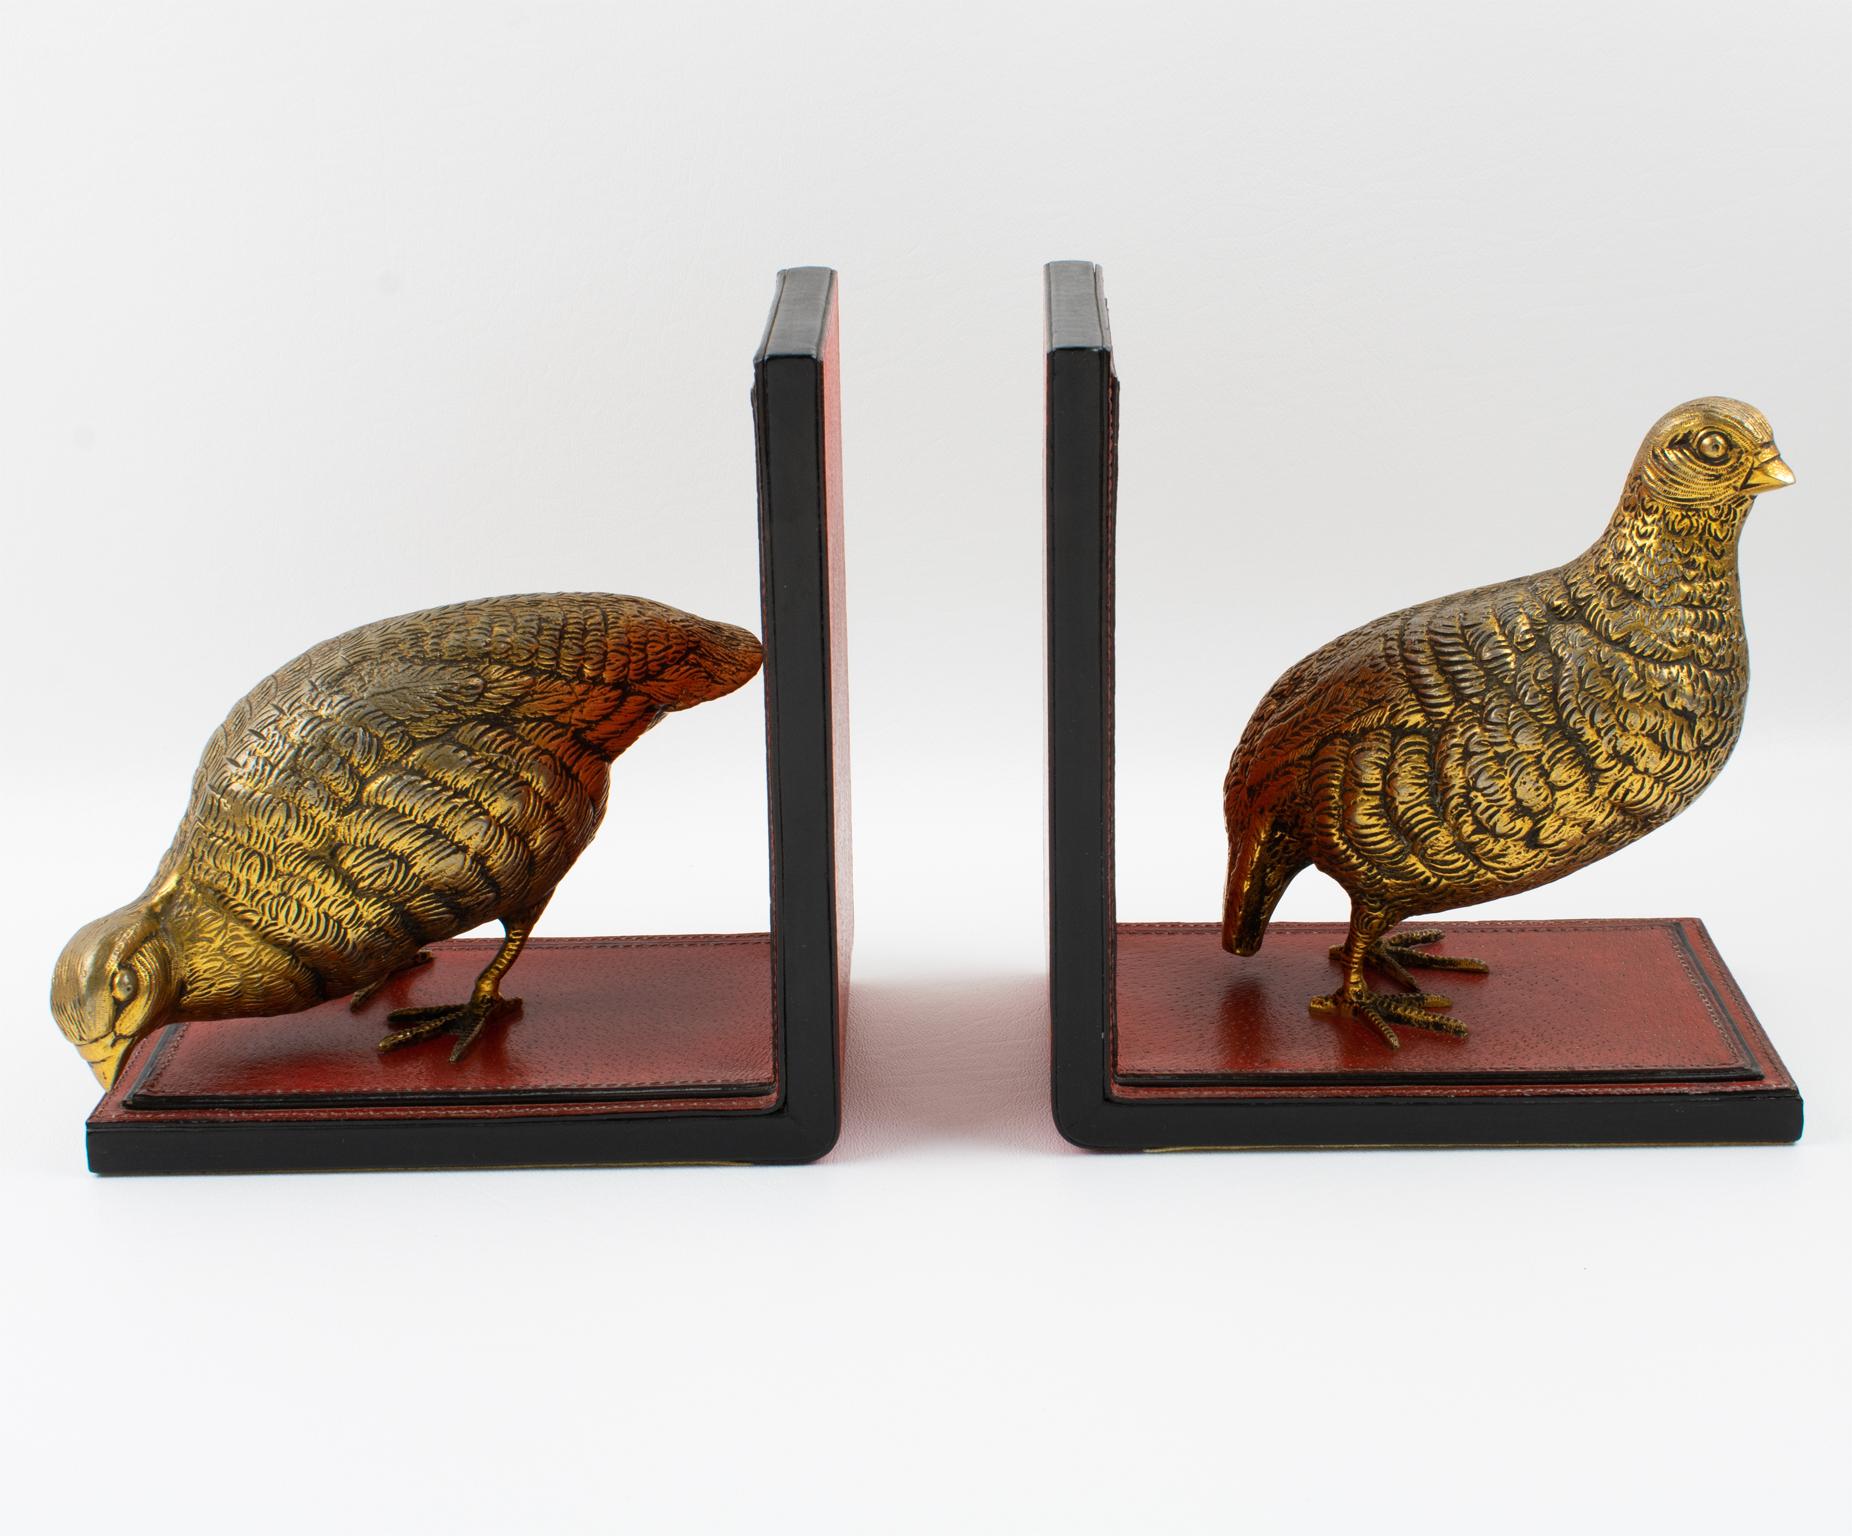 Mid-Century Modern Gucci Italy Hand-Stitched Red Leather Bookends with Gilt Metal Partridges, 1970s For Sale